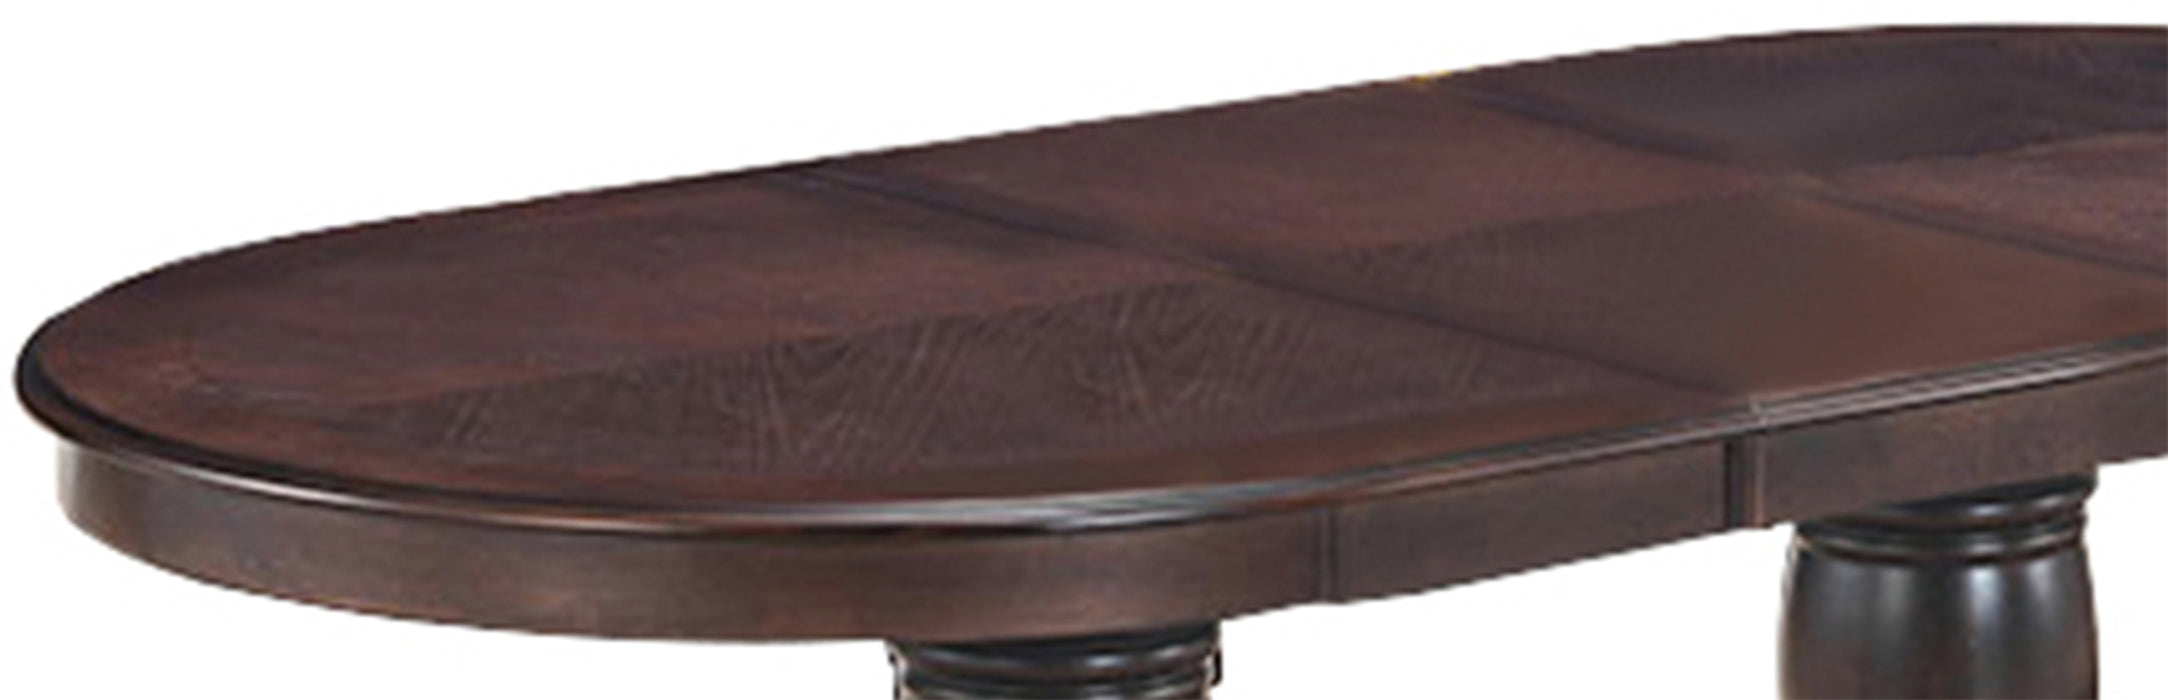 Lakewood Traditional Style Dining Table in Espresso finish Wood